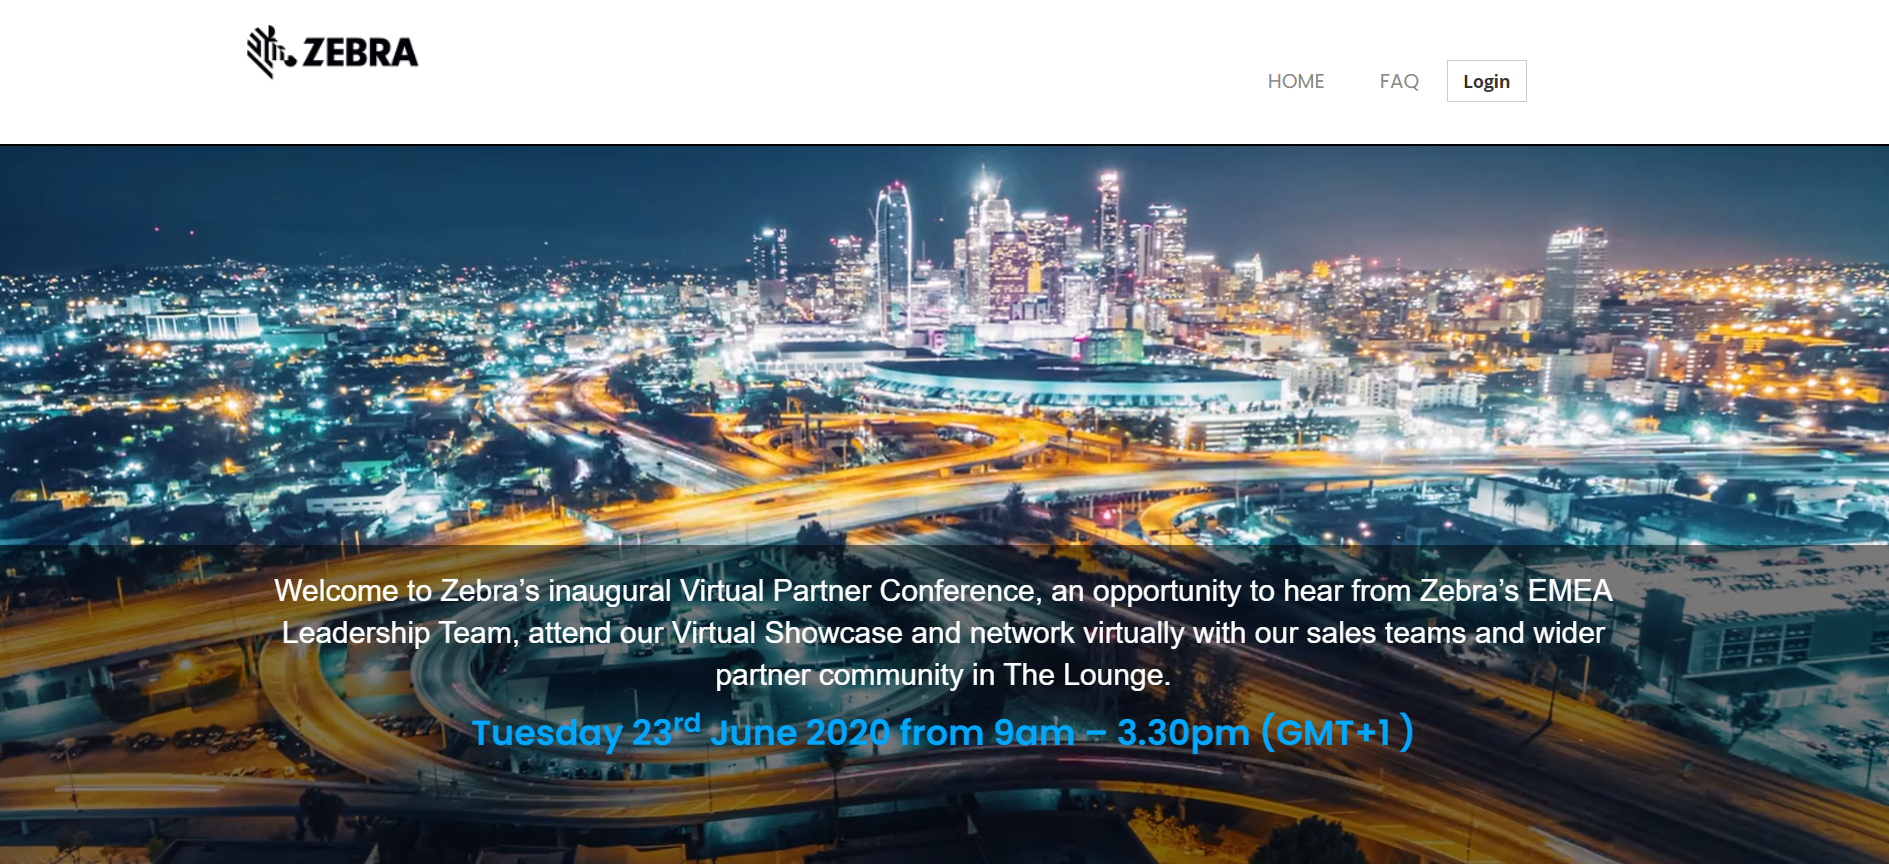 vFairs Event Landing Page